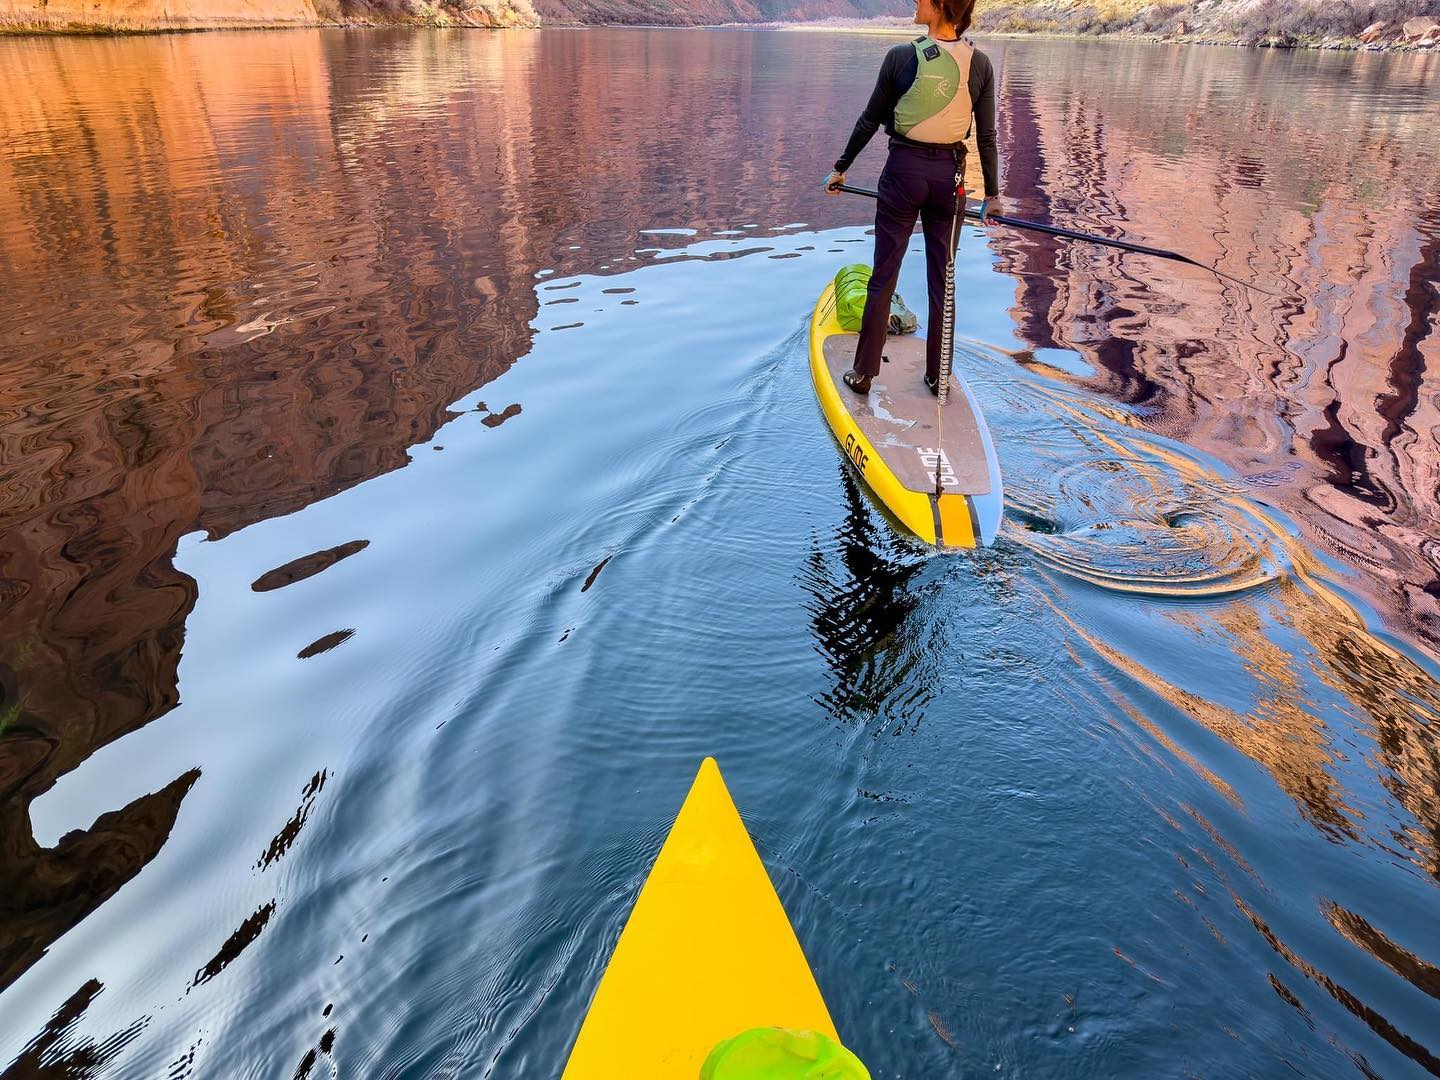 stand up paddleboarding on inflatable boards